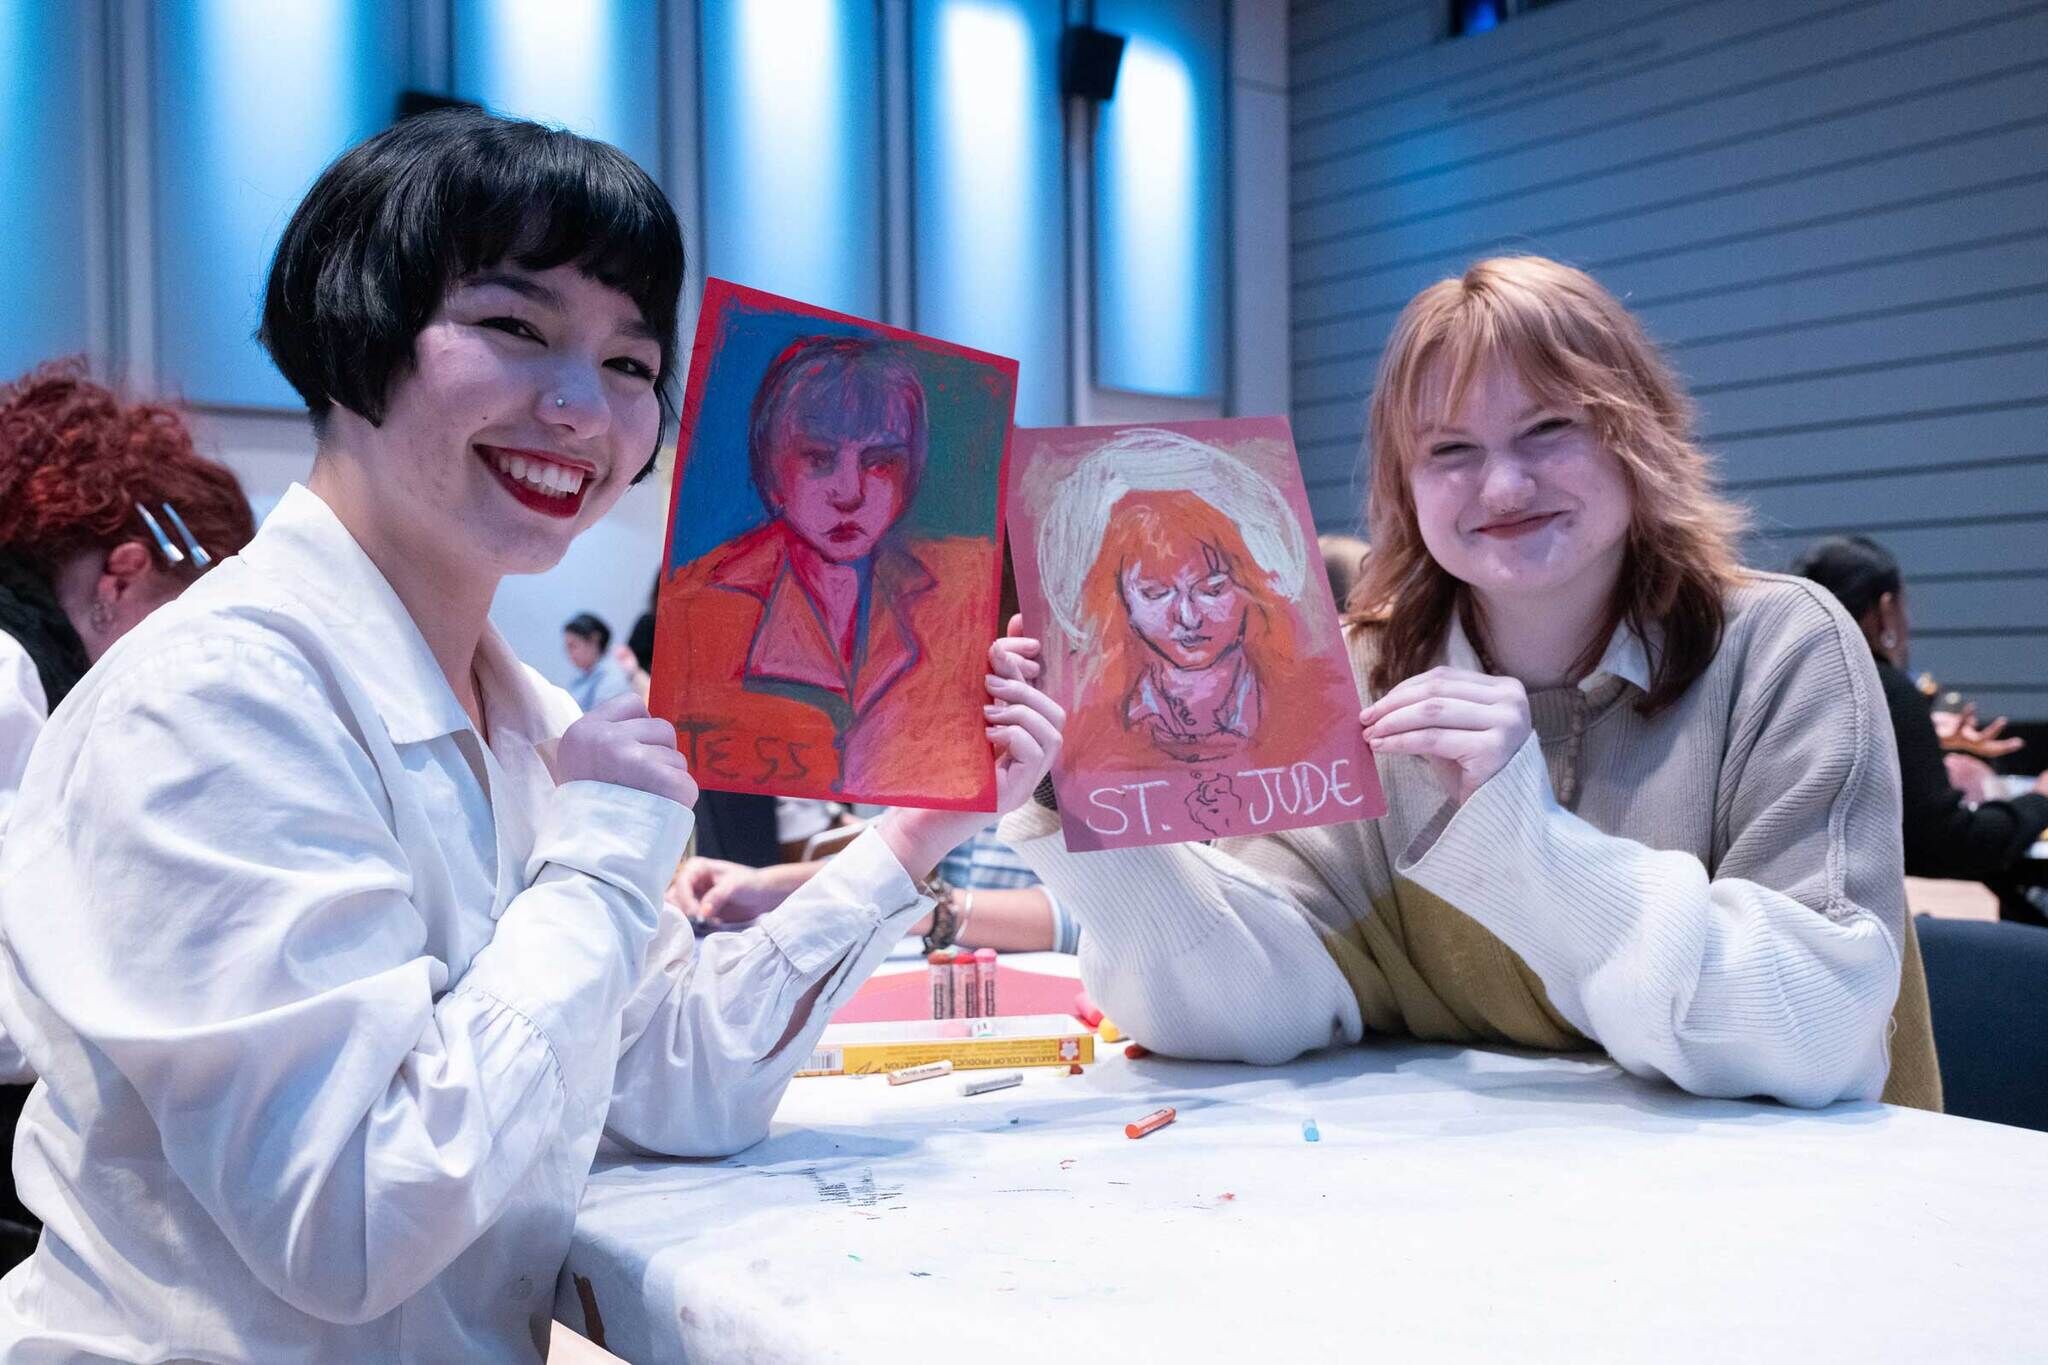 Two college-age individuals hold pastel portraits of themselves, drawn by one another. One has short dark hair and a white collared shirt and the other has mid-length red hair and a gray sweatshirt.